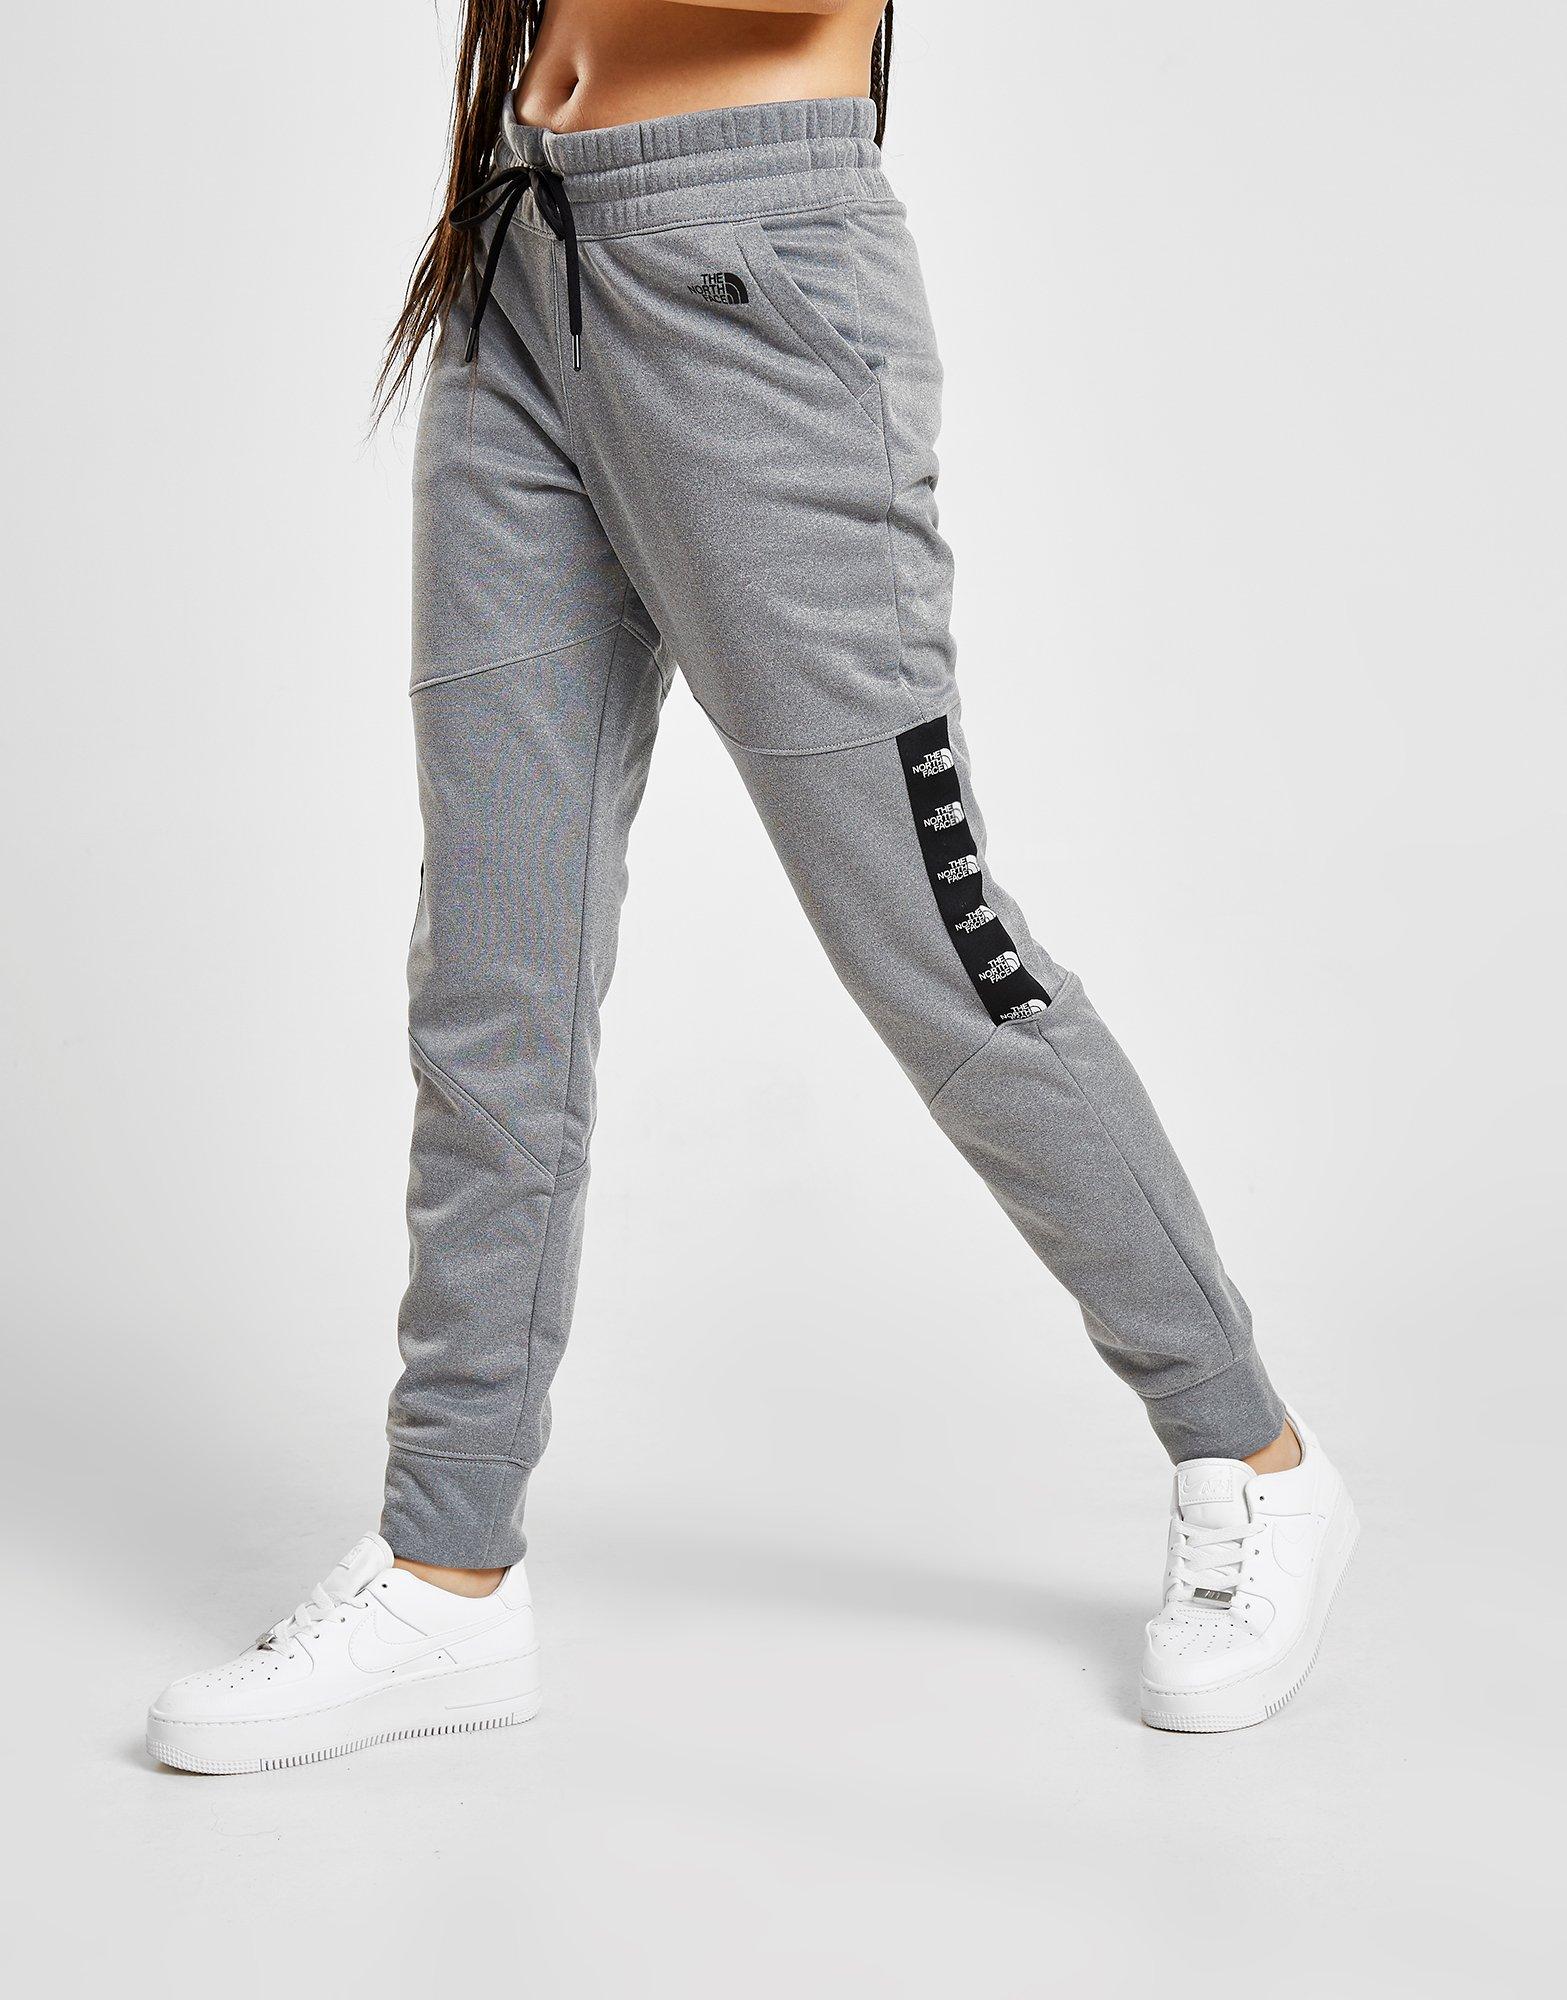 north face tracksuit womens jd